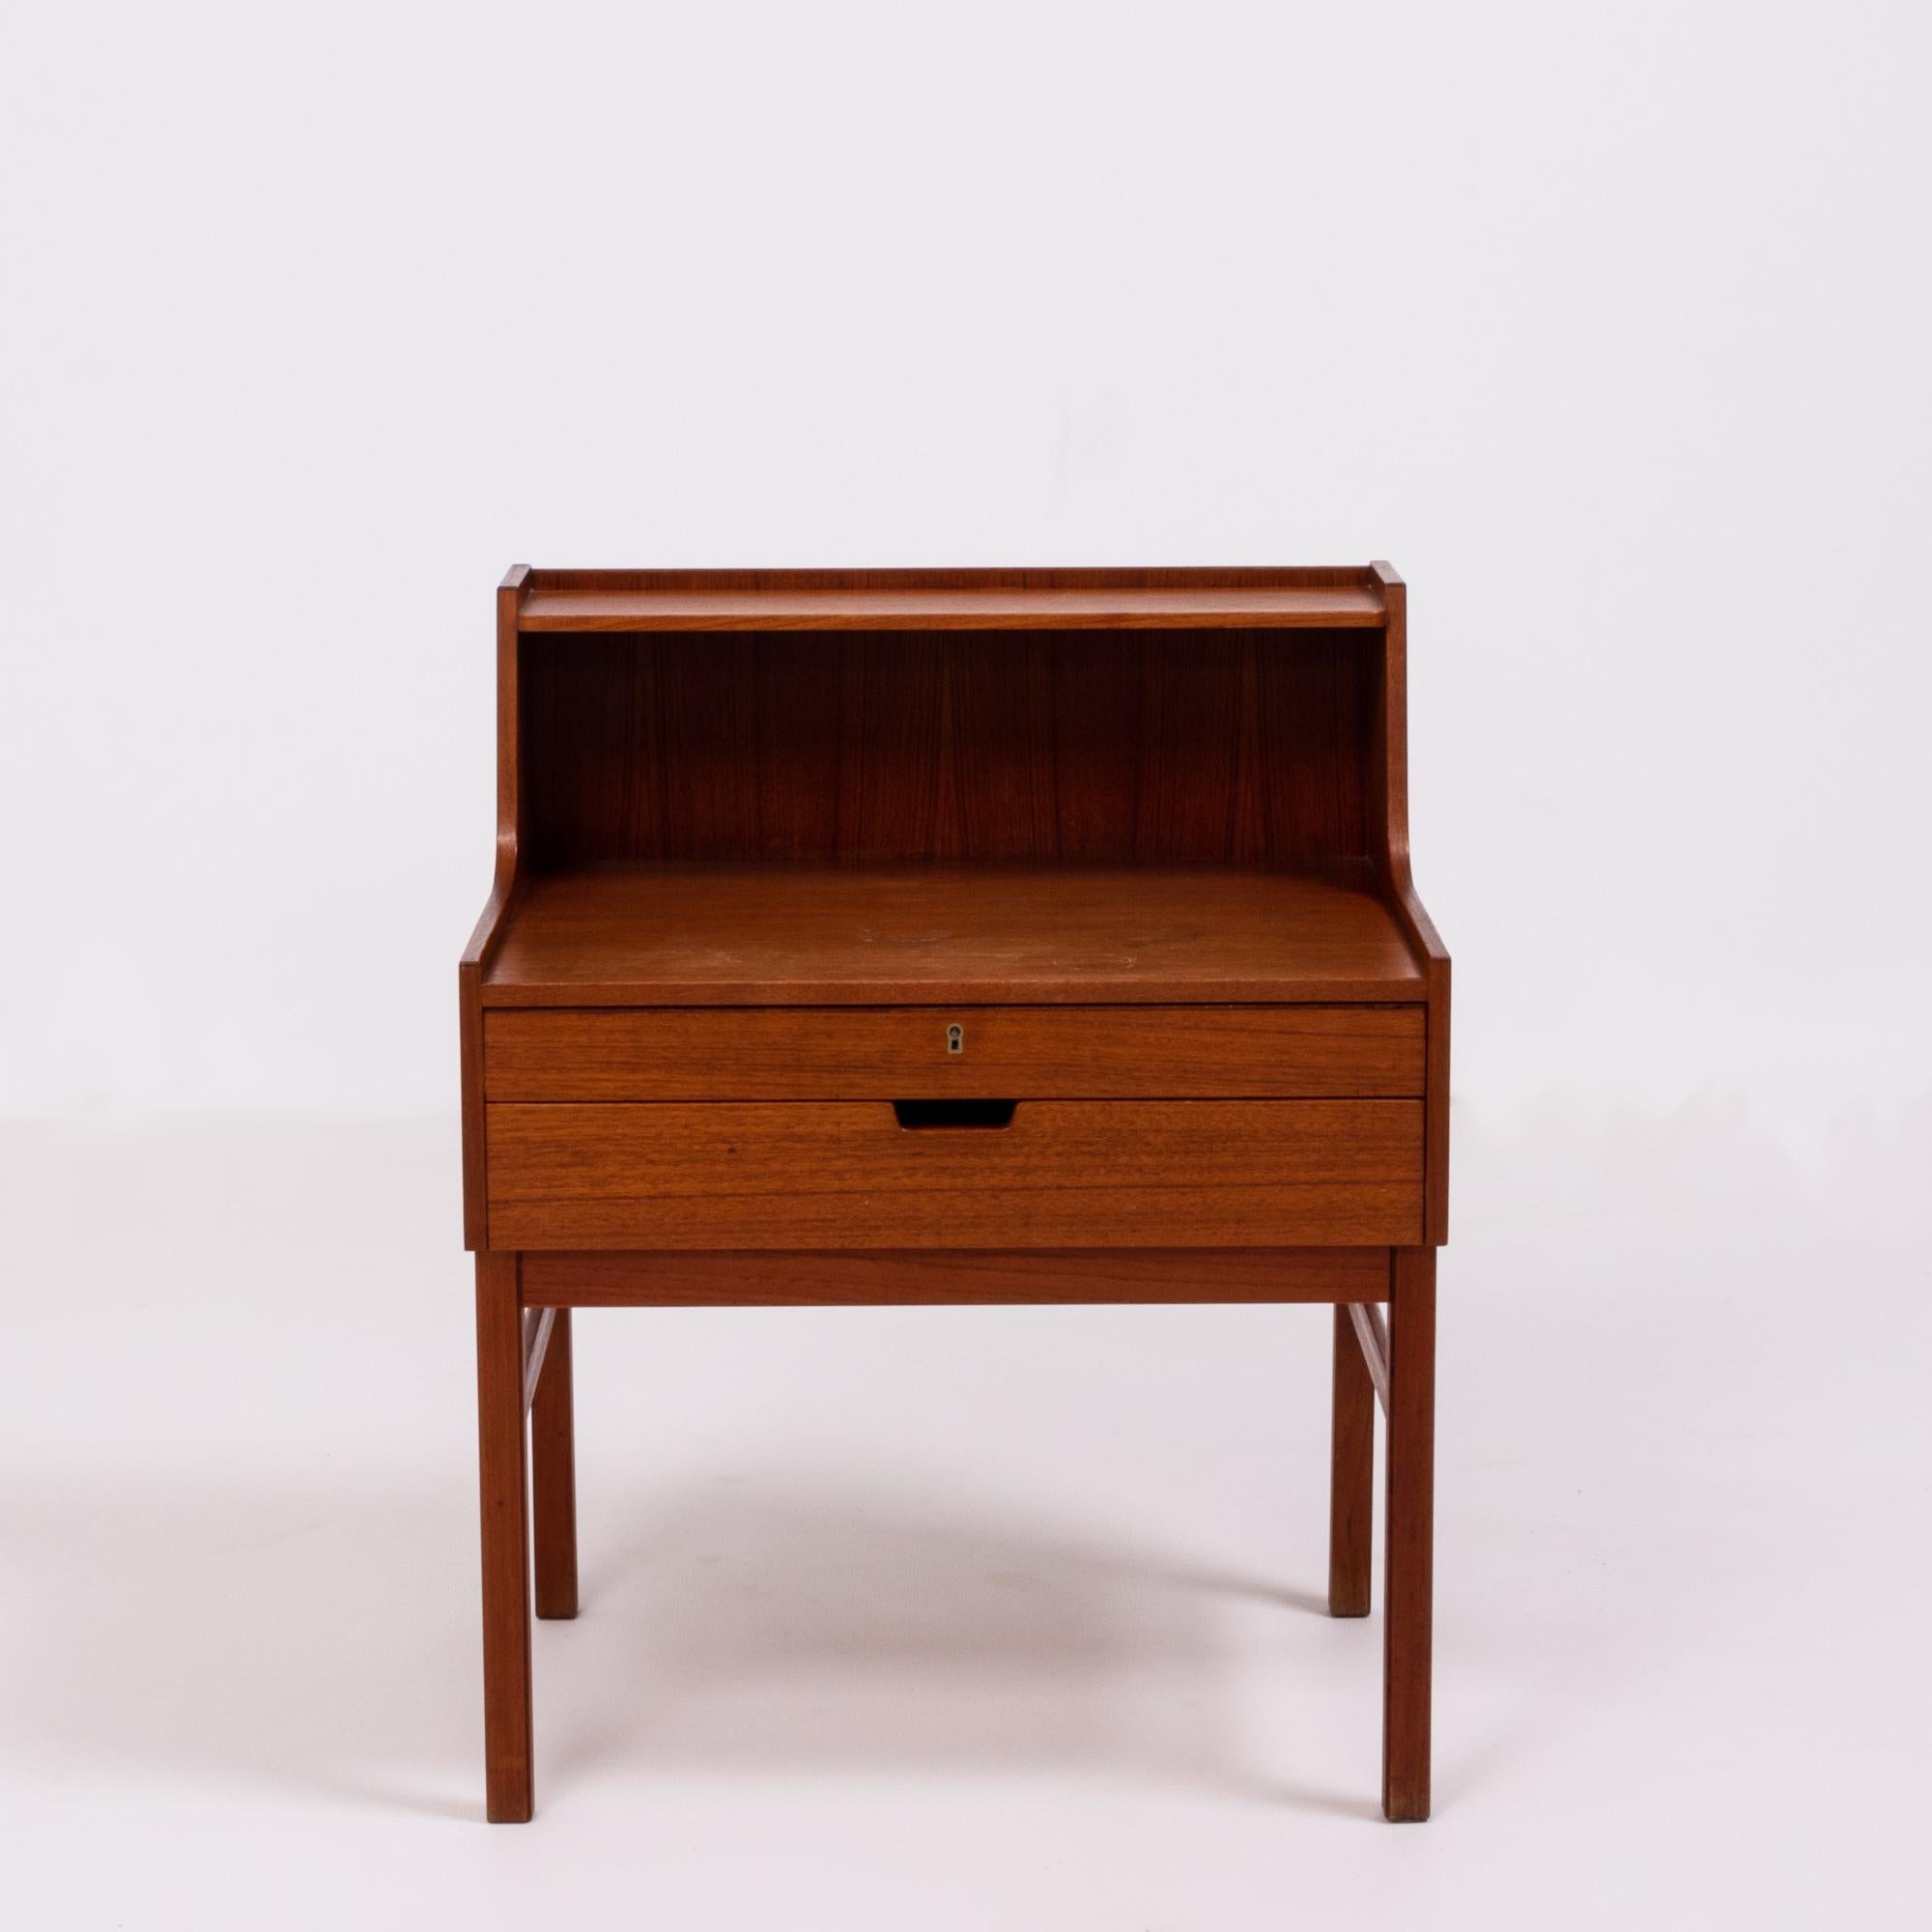 Designed by Sven Engström and Gunnar Myrstrand, this bedside table is beautifully constructed in teak.
Featuring a narrow shelf at the top, the bedside table has two drawers, both with internal dividers. The top drawer can be locked with a key.
  